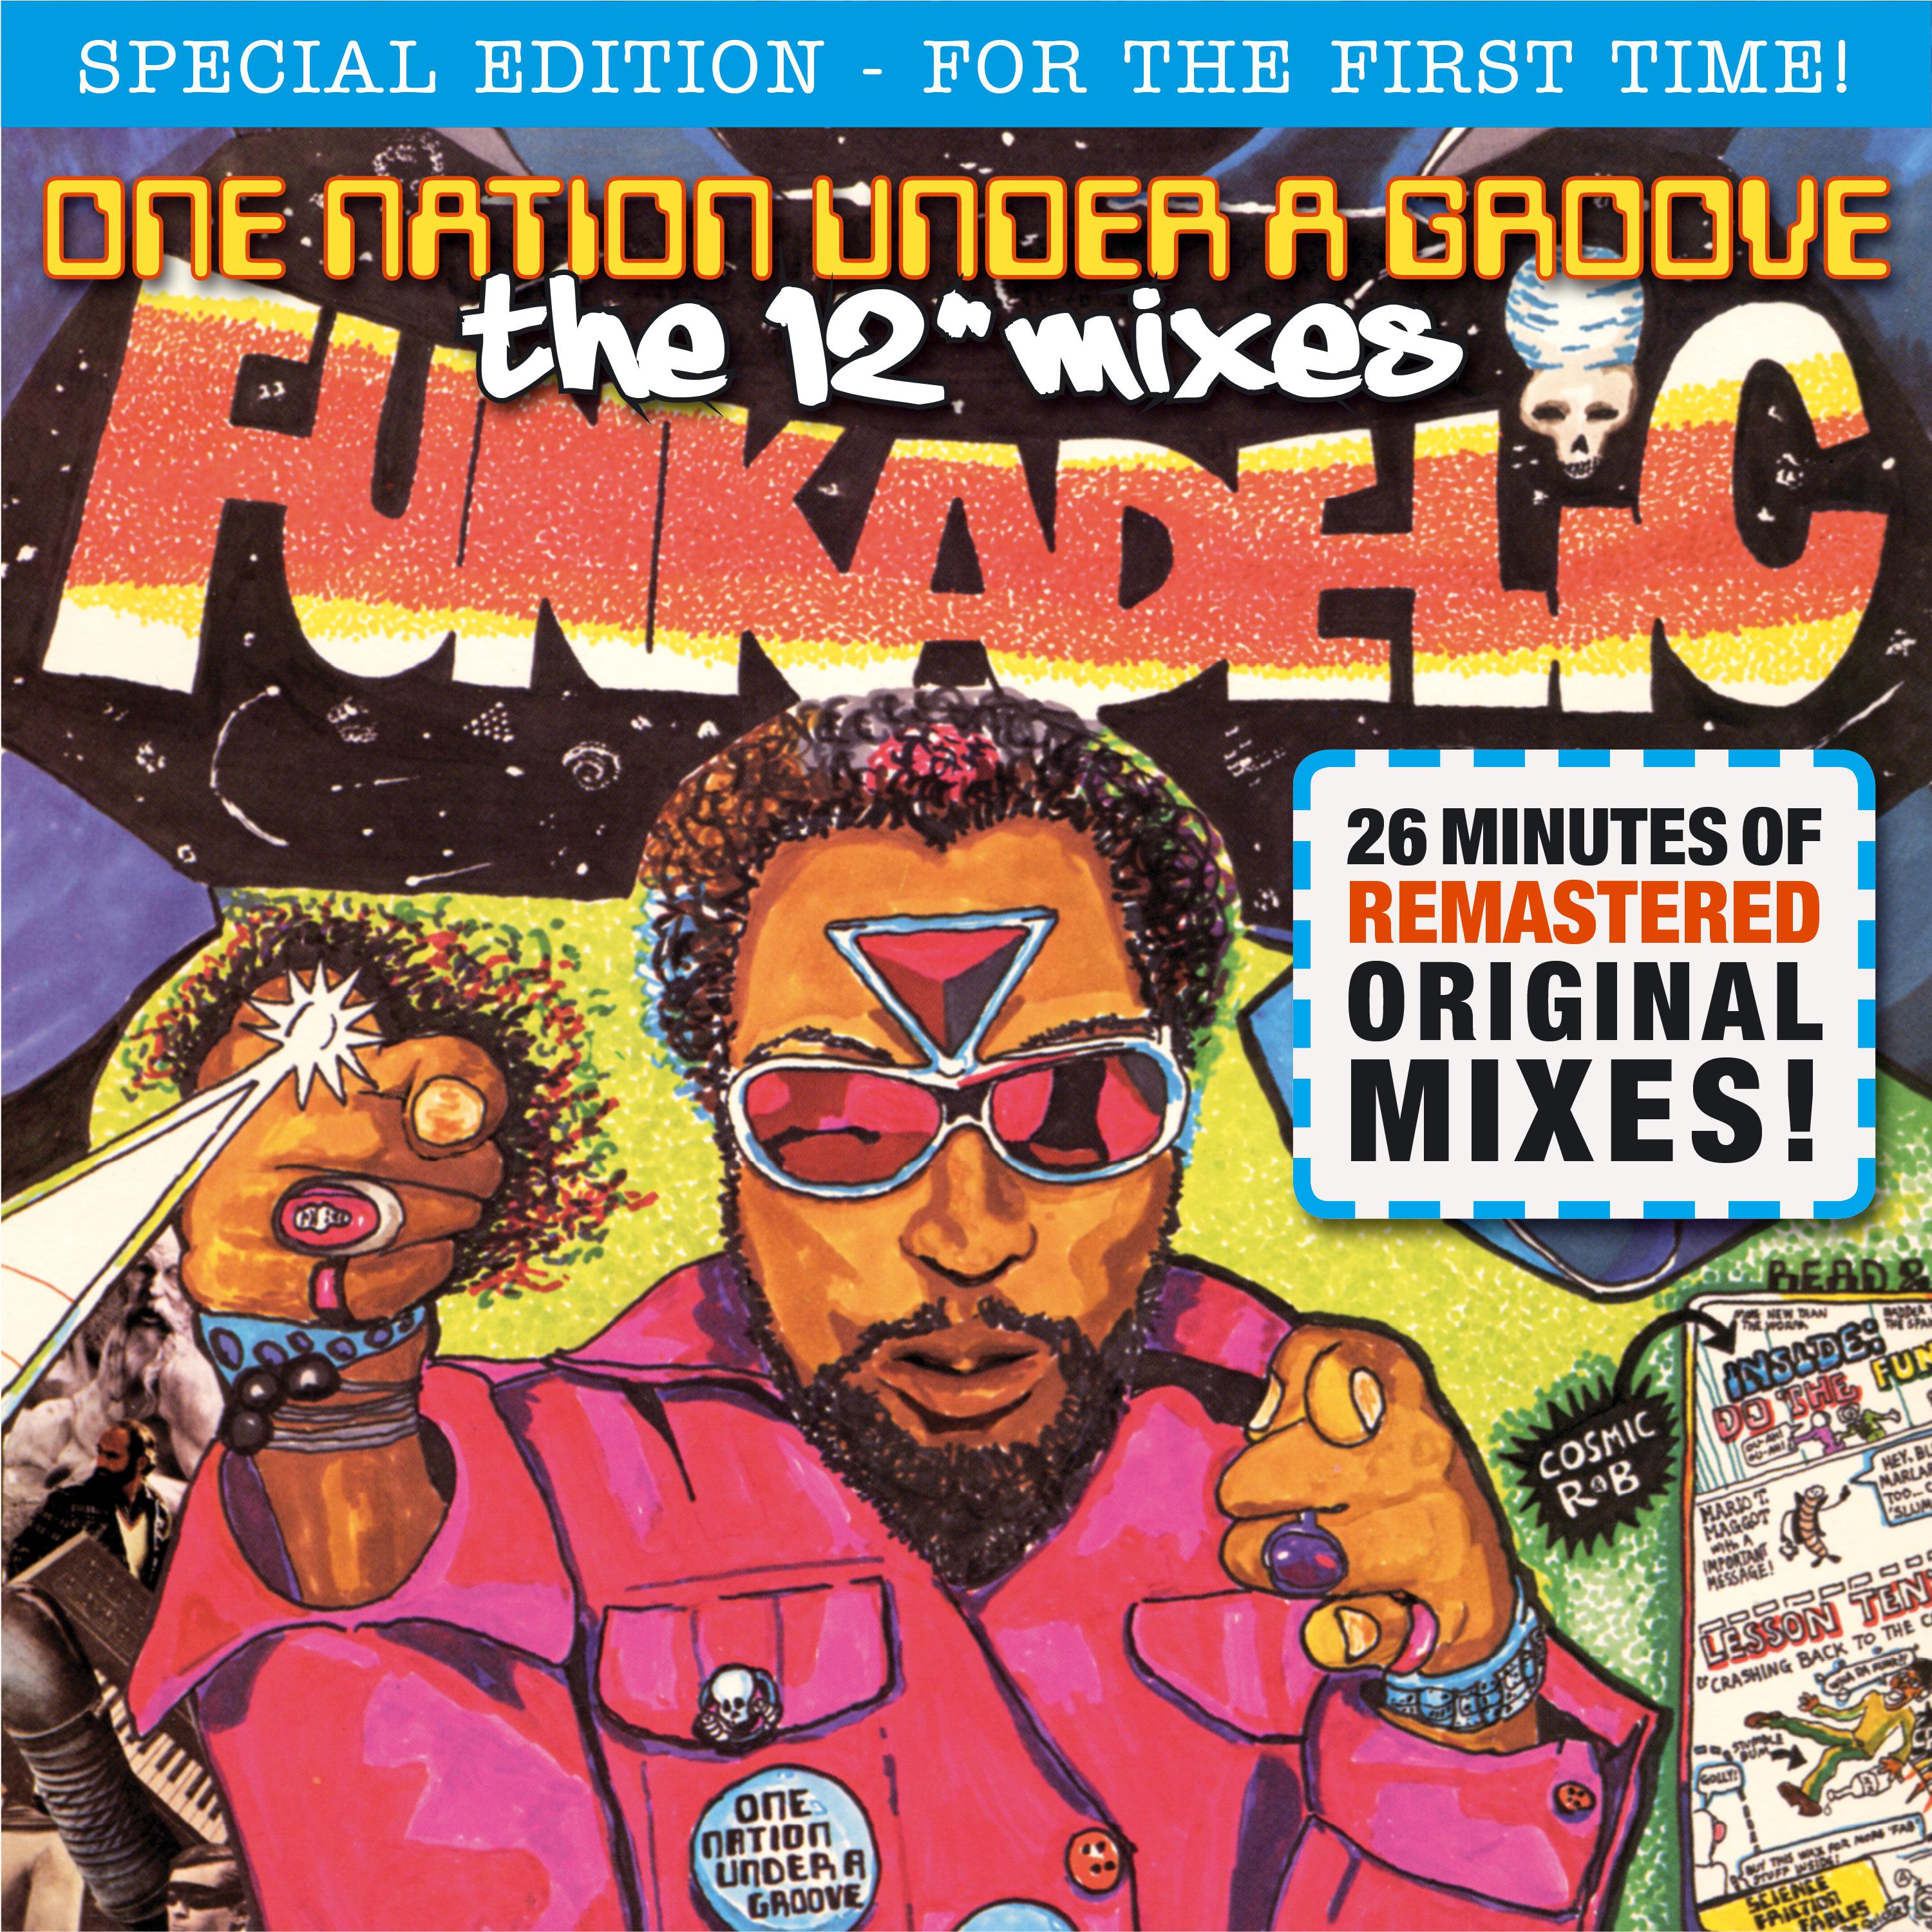 One Nation Under a Groove - The Mixes (Remastered)